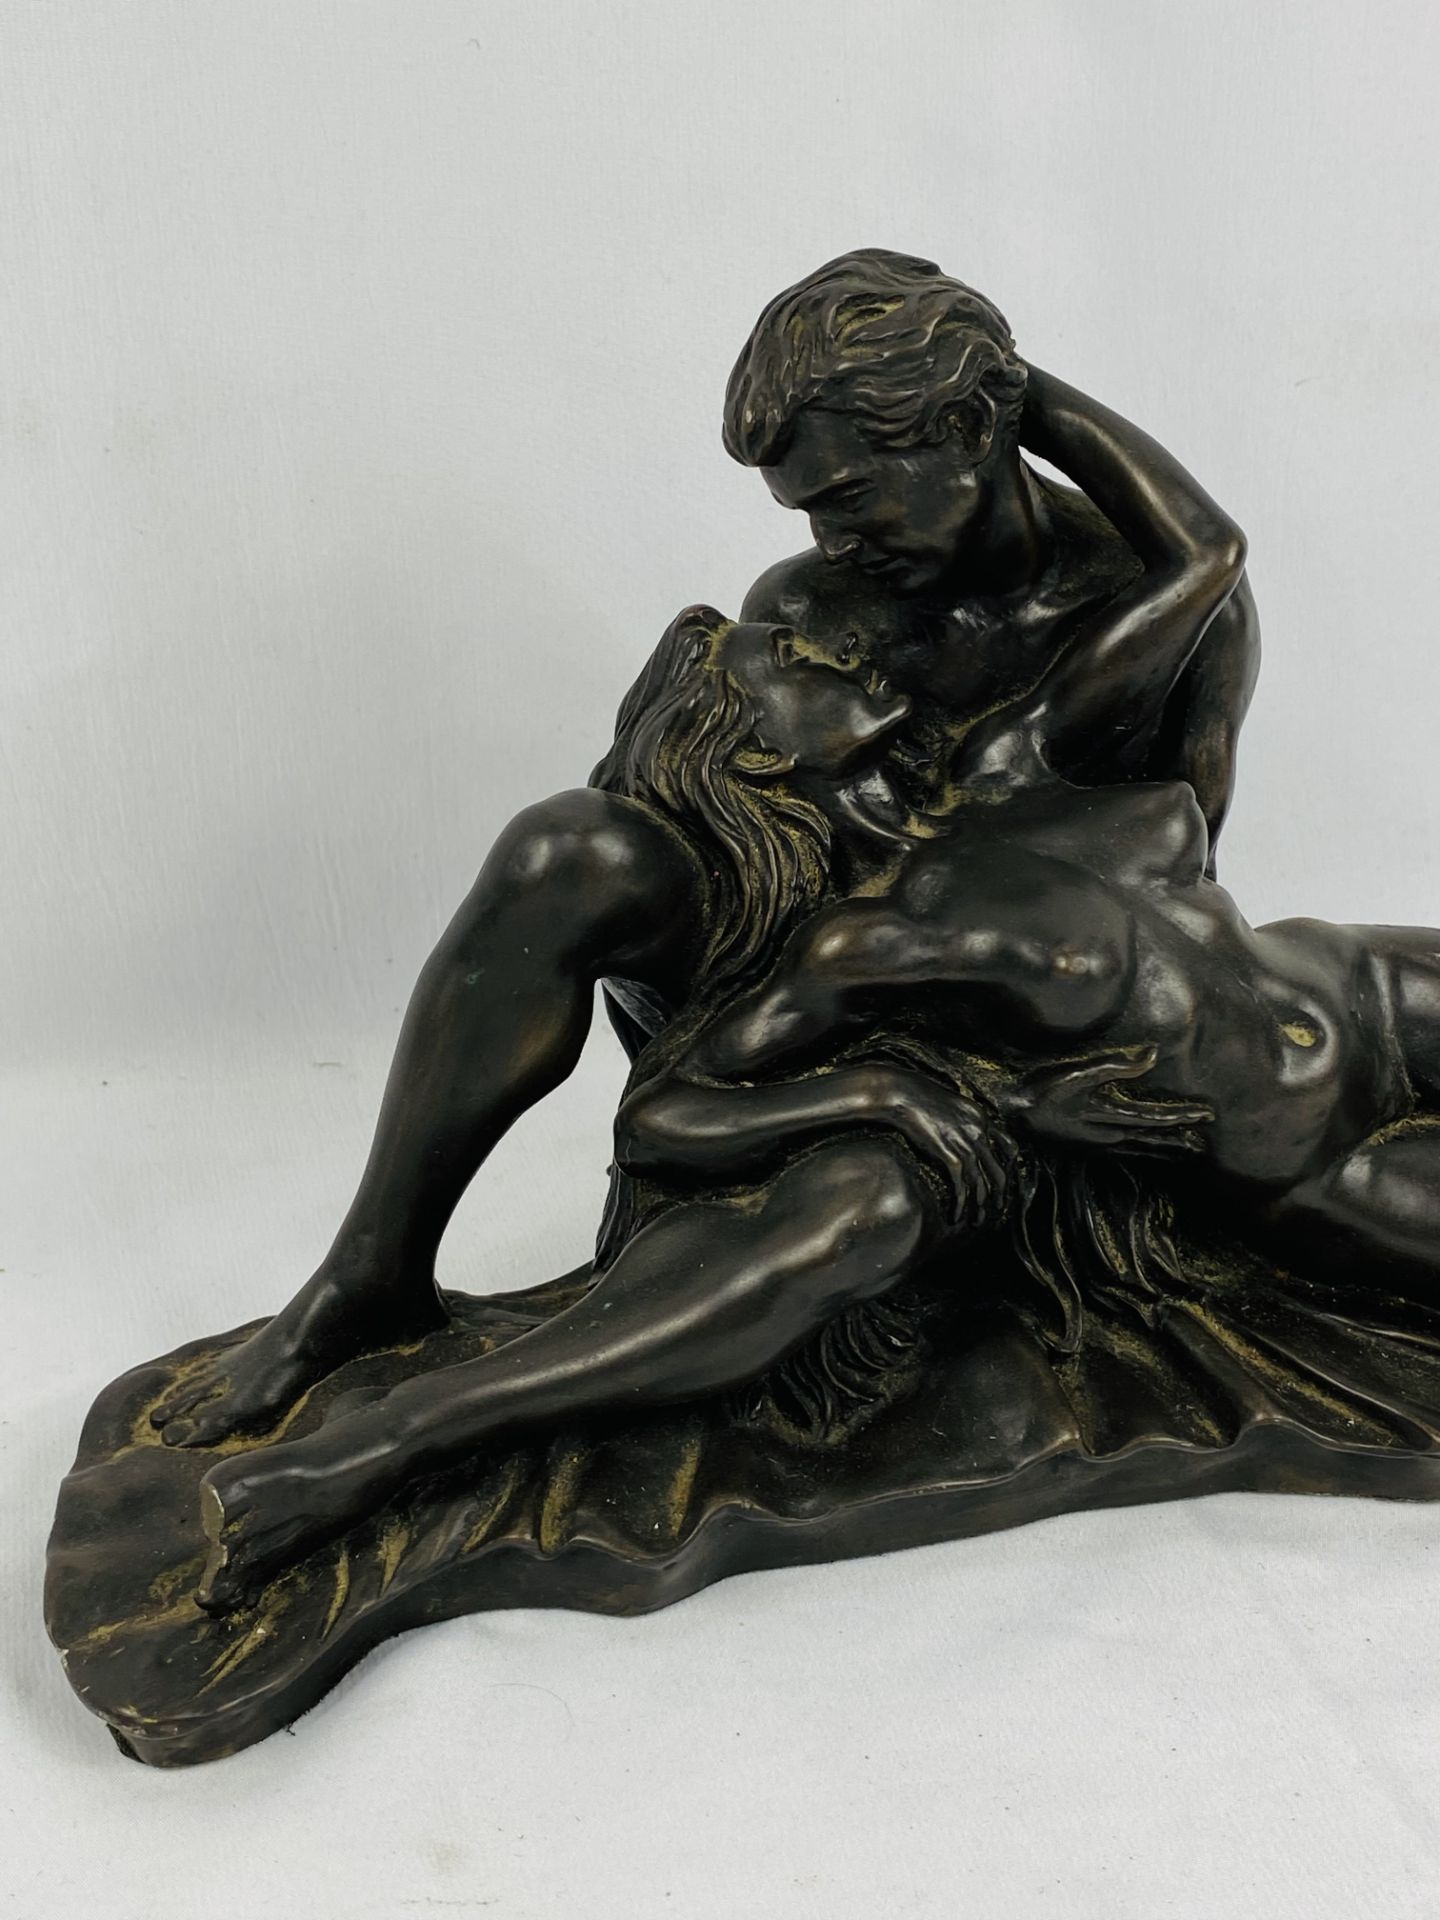 Resin bronzed sculpture of lovers embracing, signed R Cameron - Image 2 of 4